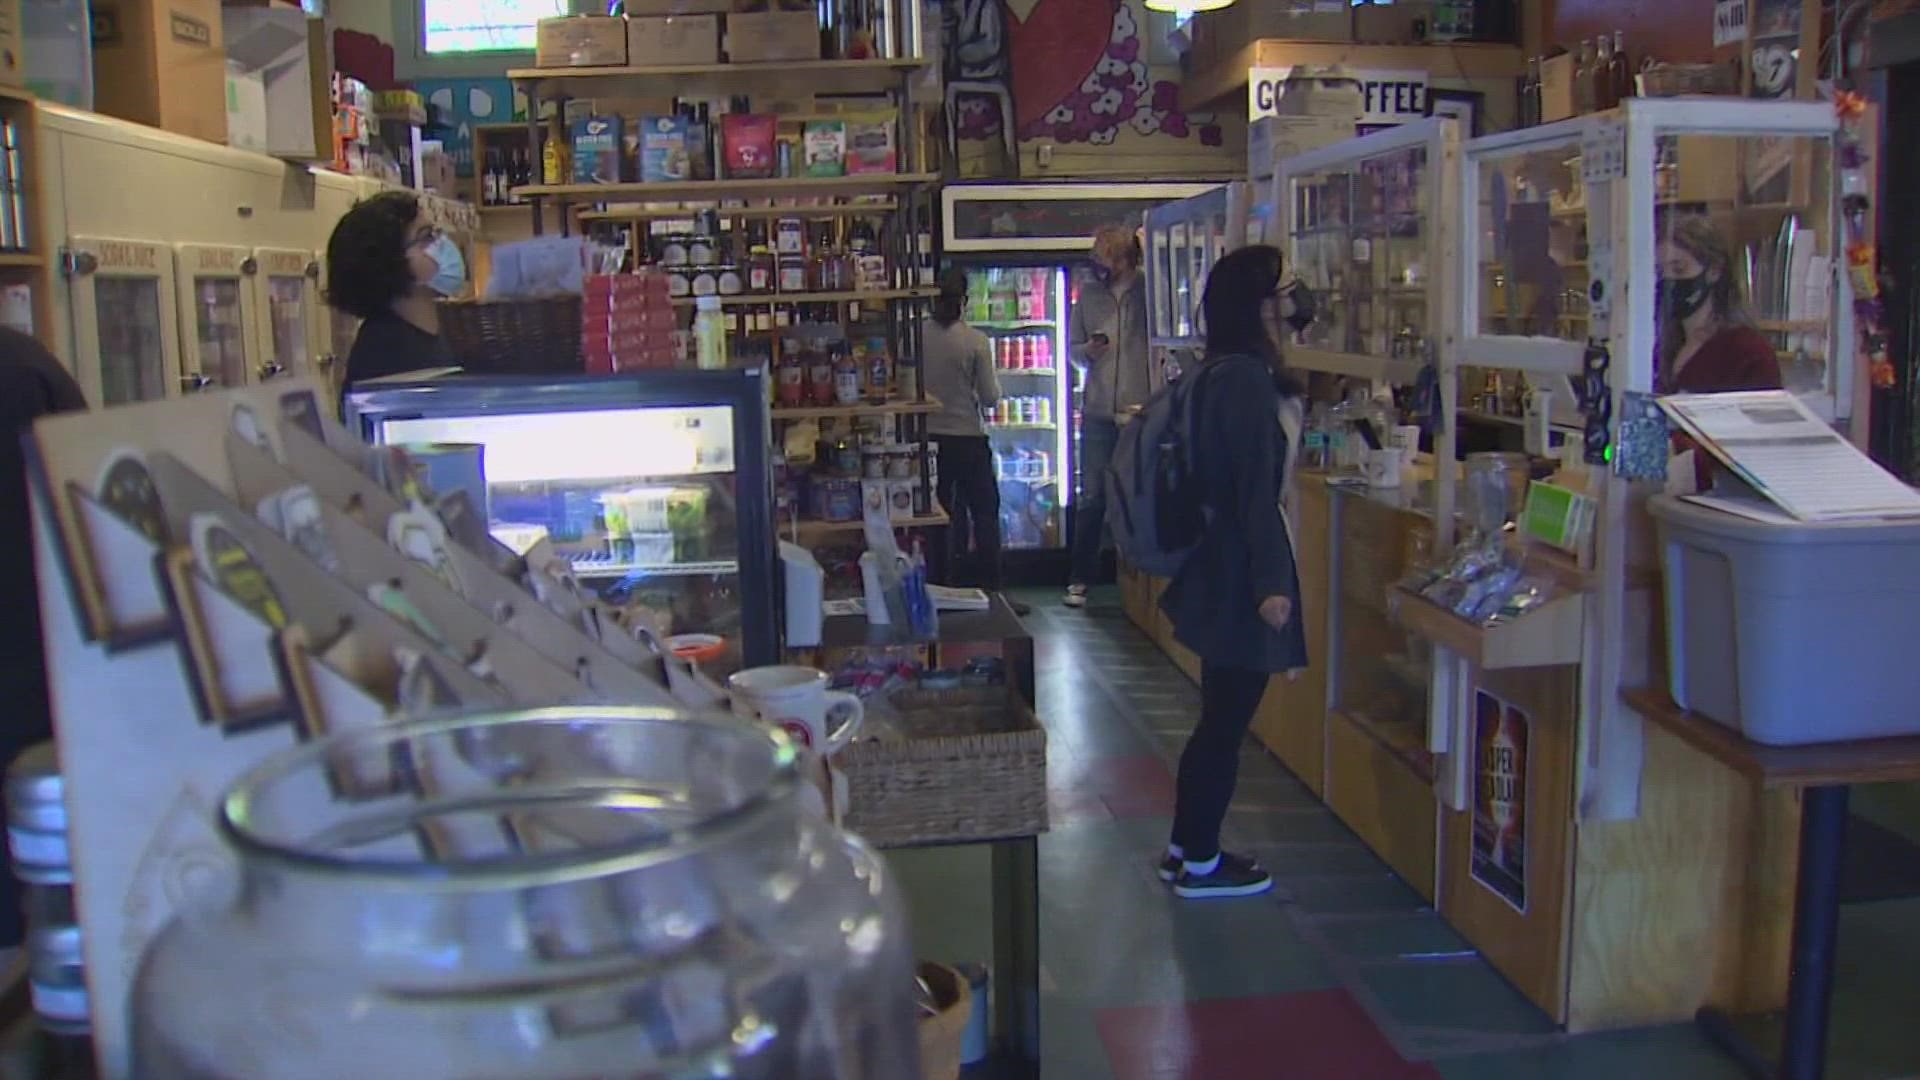 Local business owners in Seattle's University District are feeling optimistic again after a difficult 18 months.